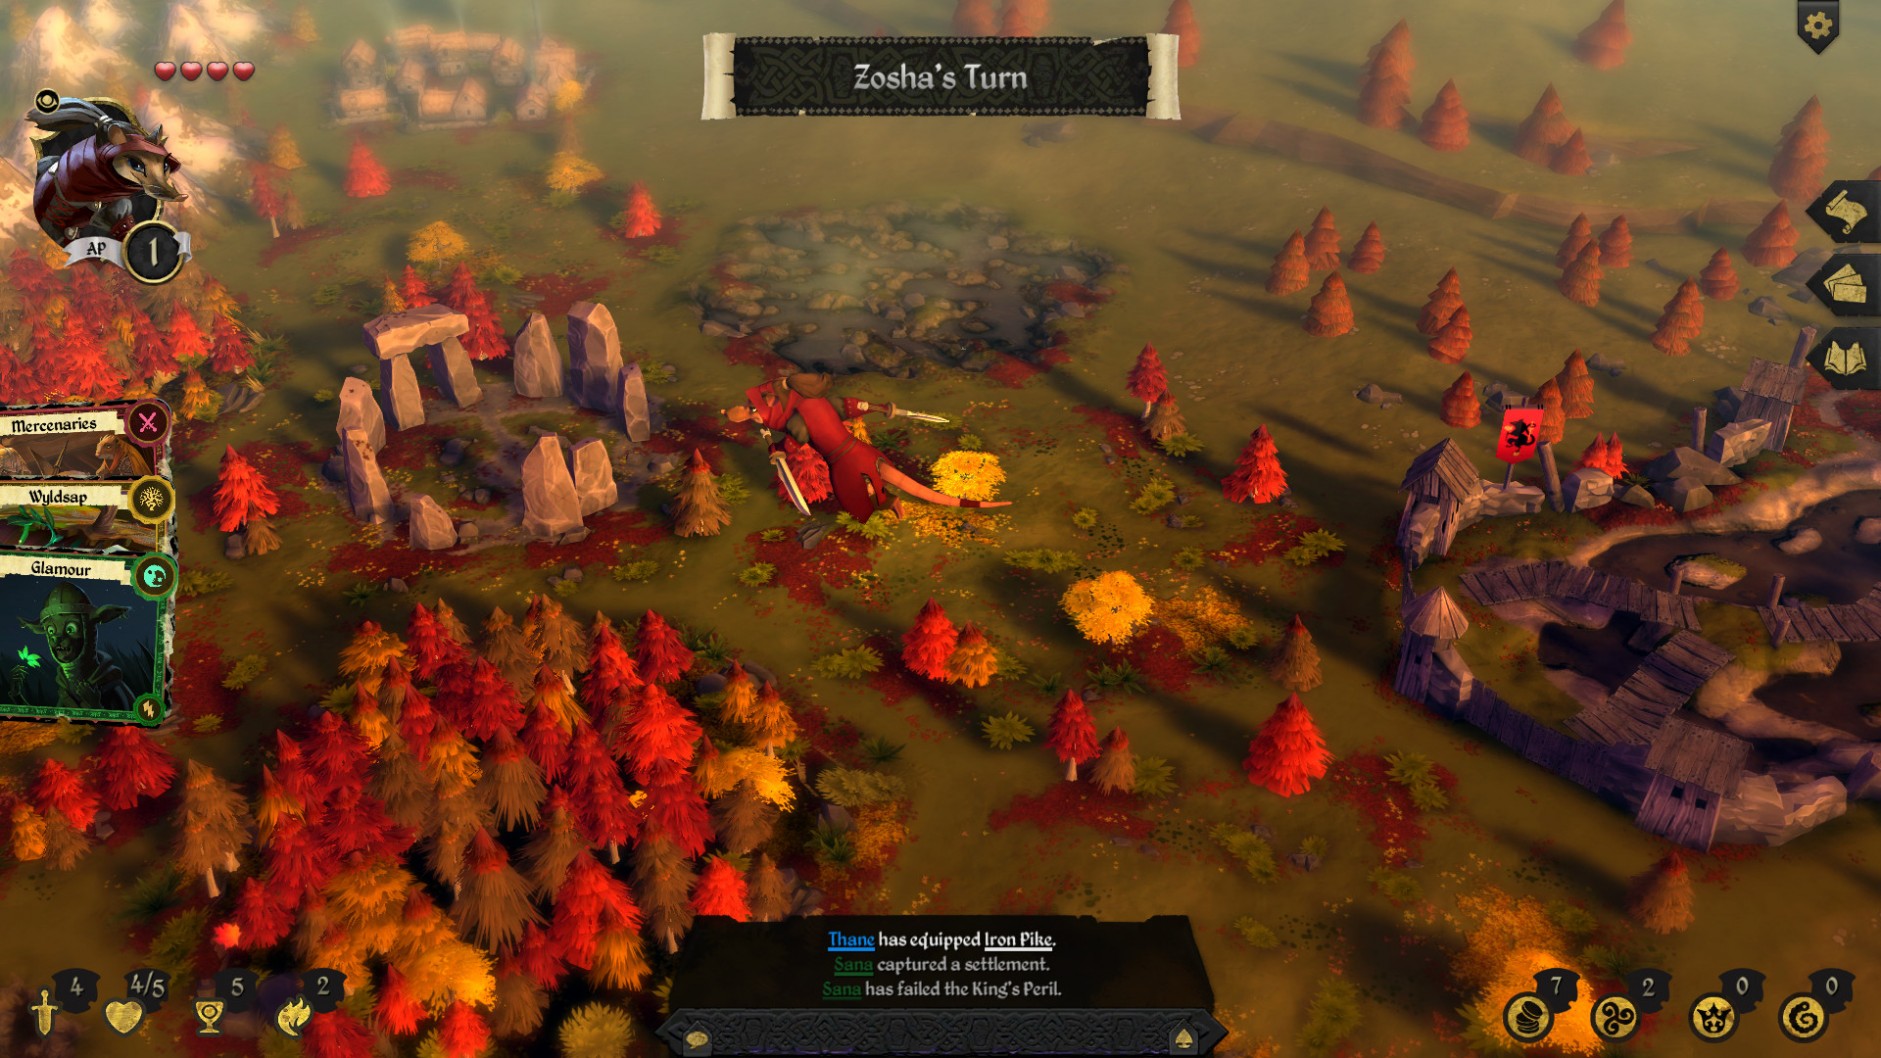 download armello 2 for free